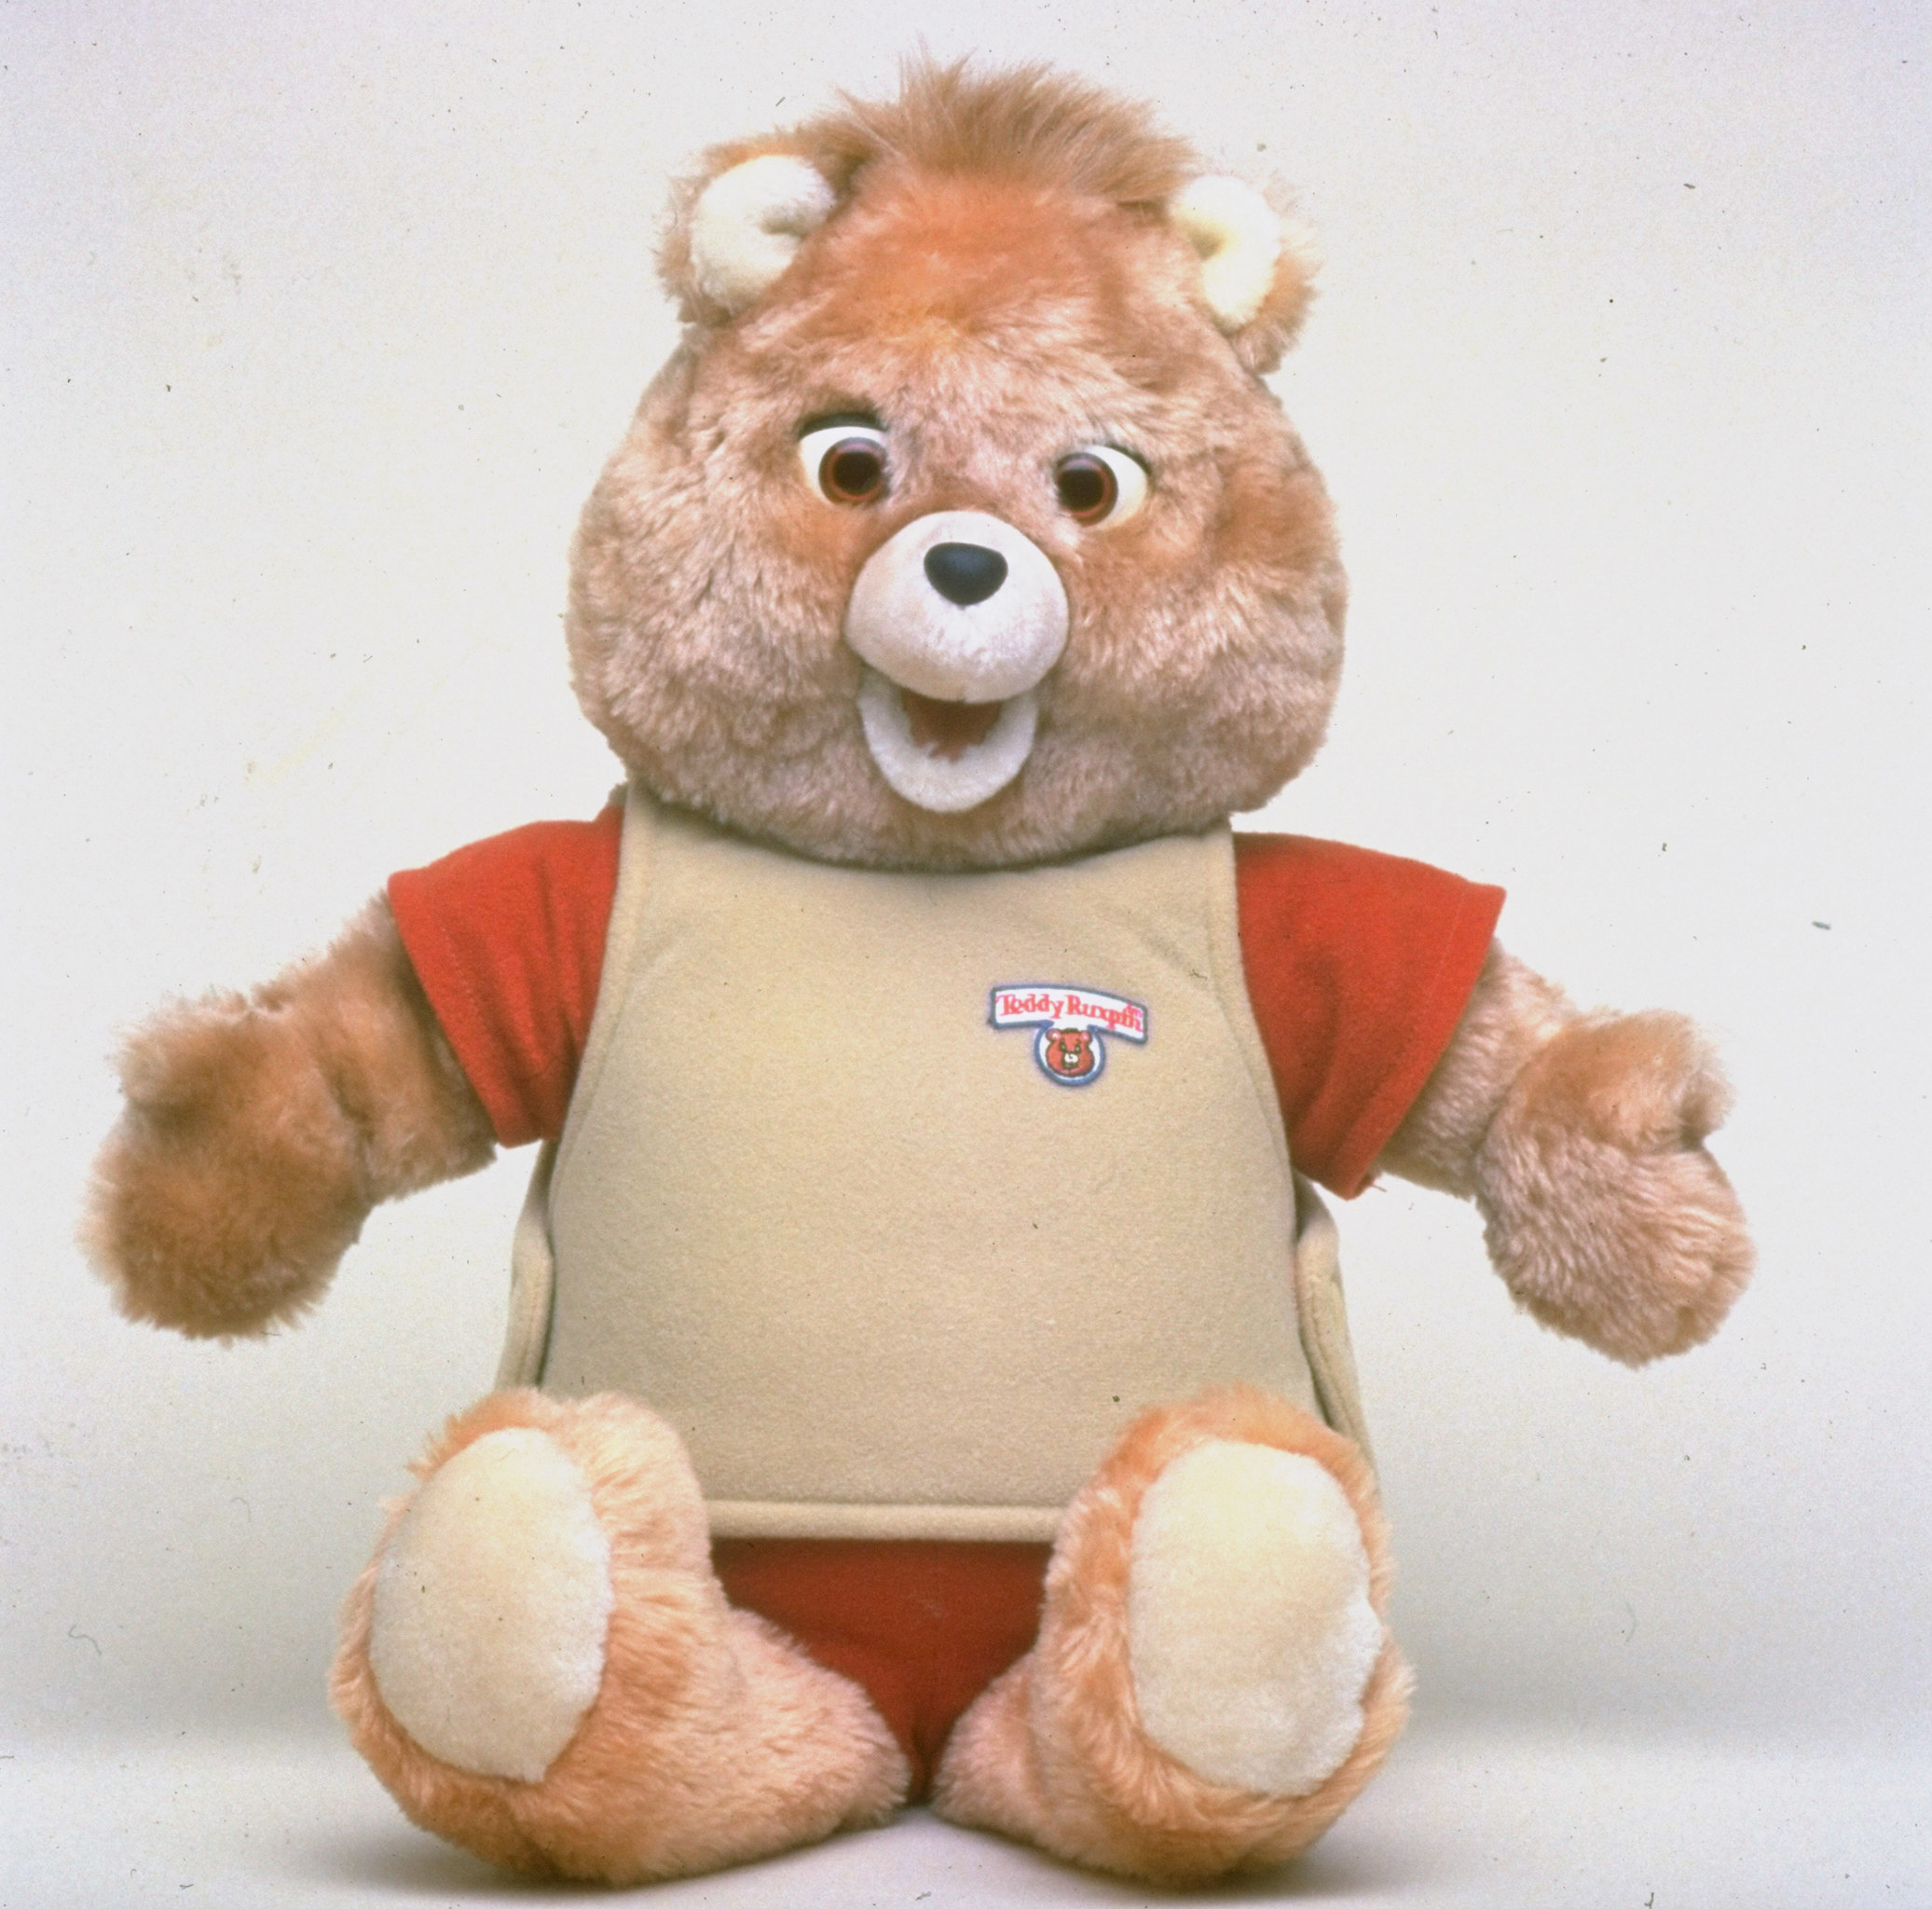 A product shot of Teddy Ruxpin doll